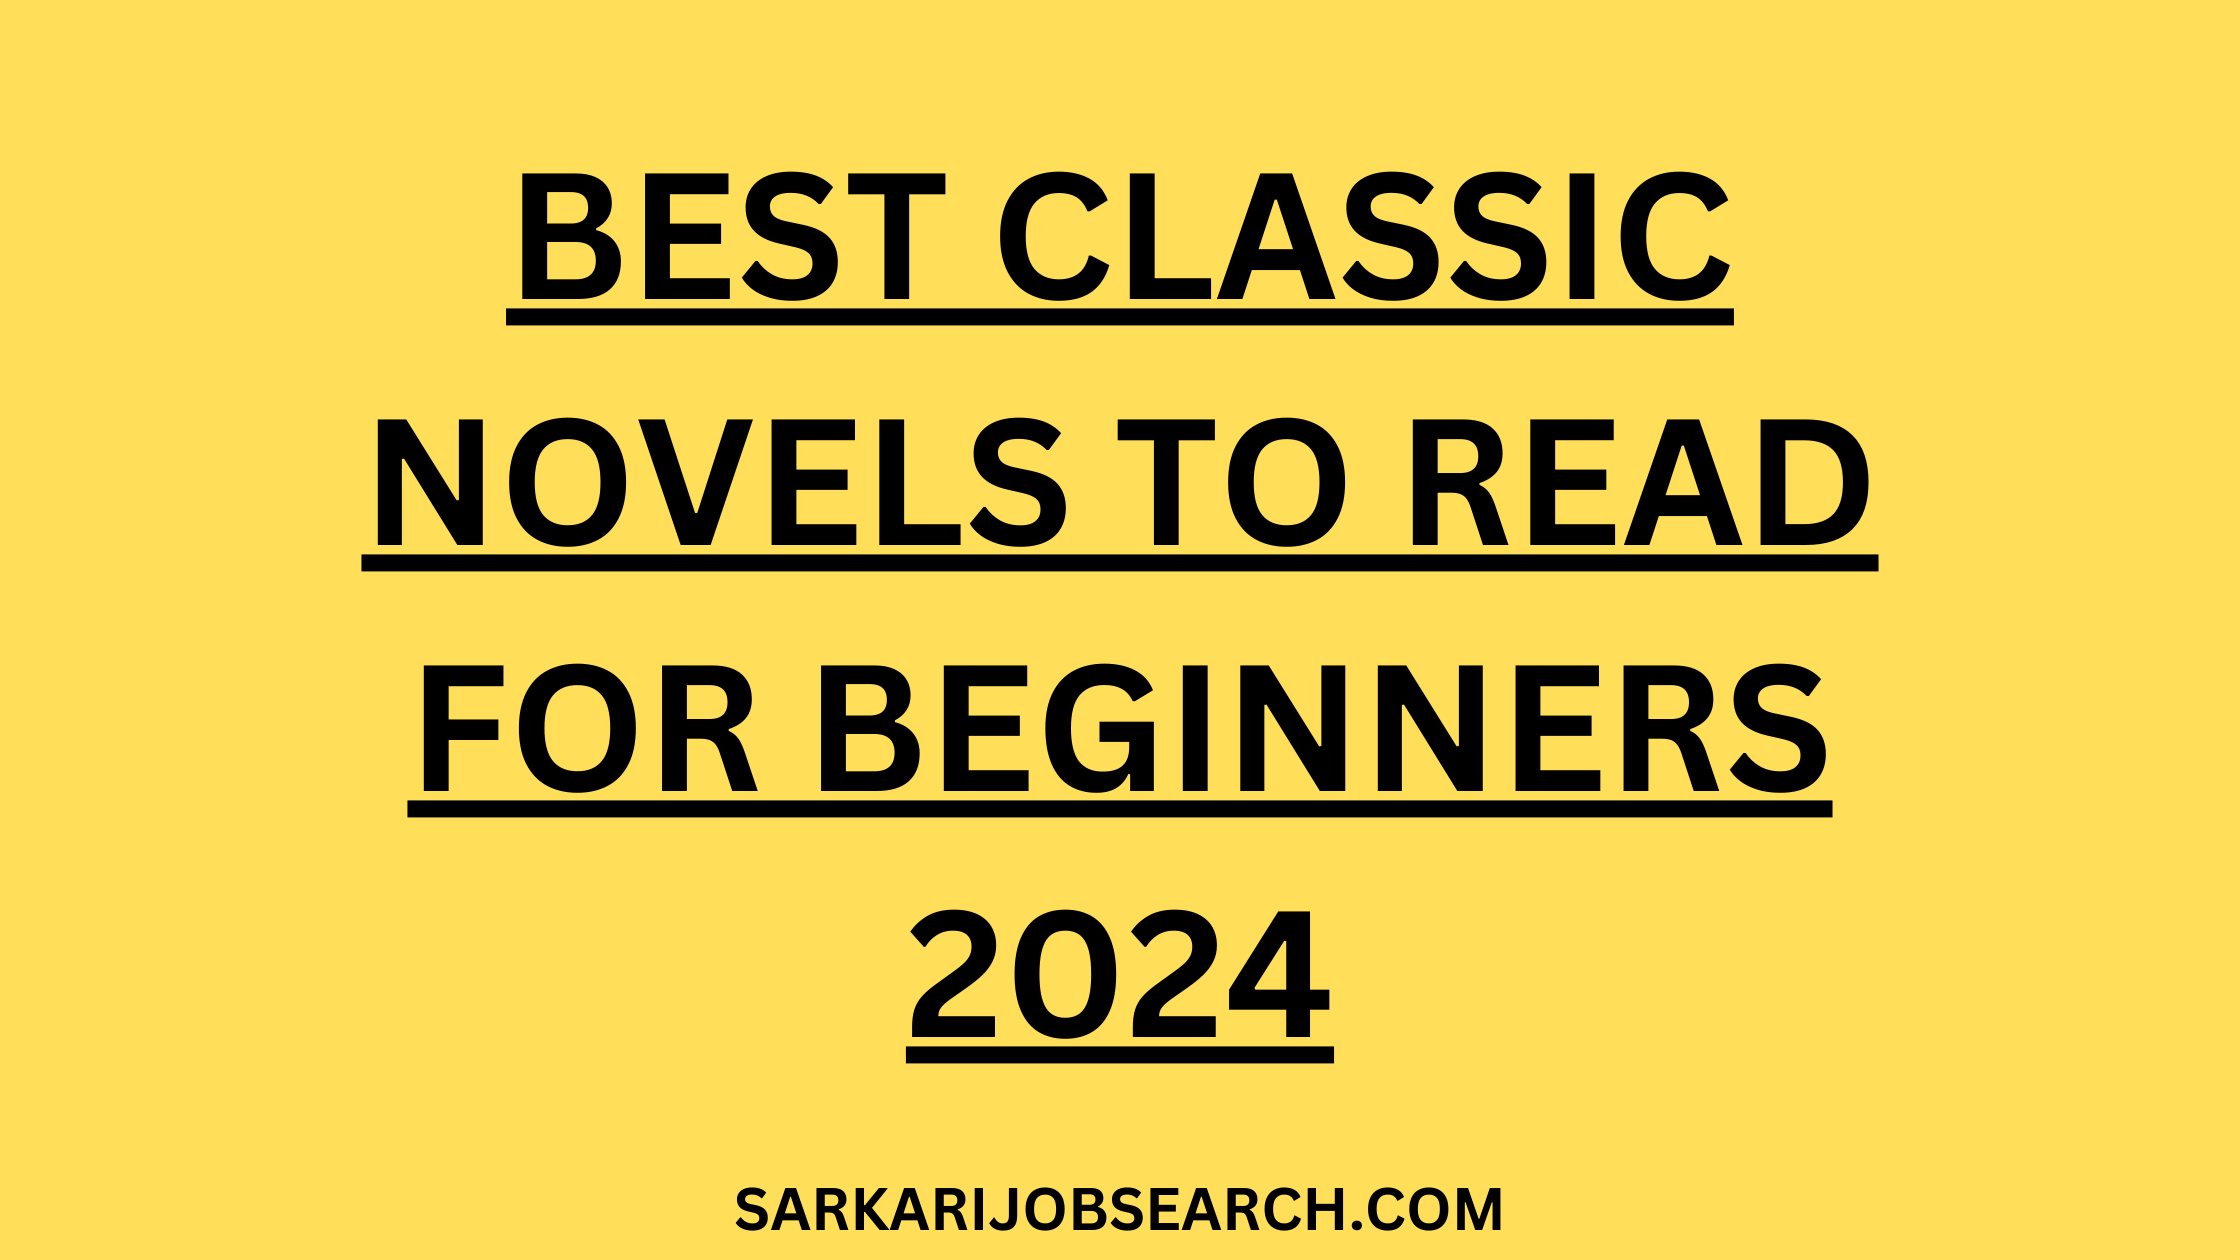 Best Classic Novels To Read For Beginners | 2024